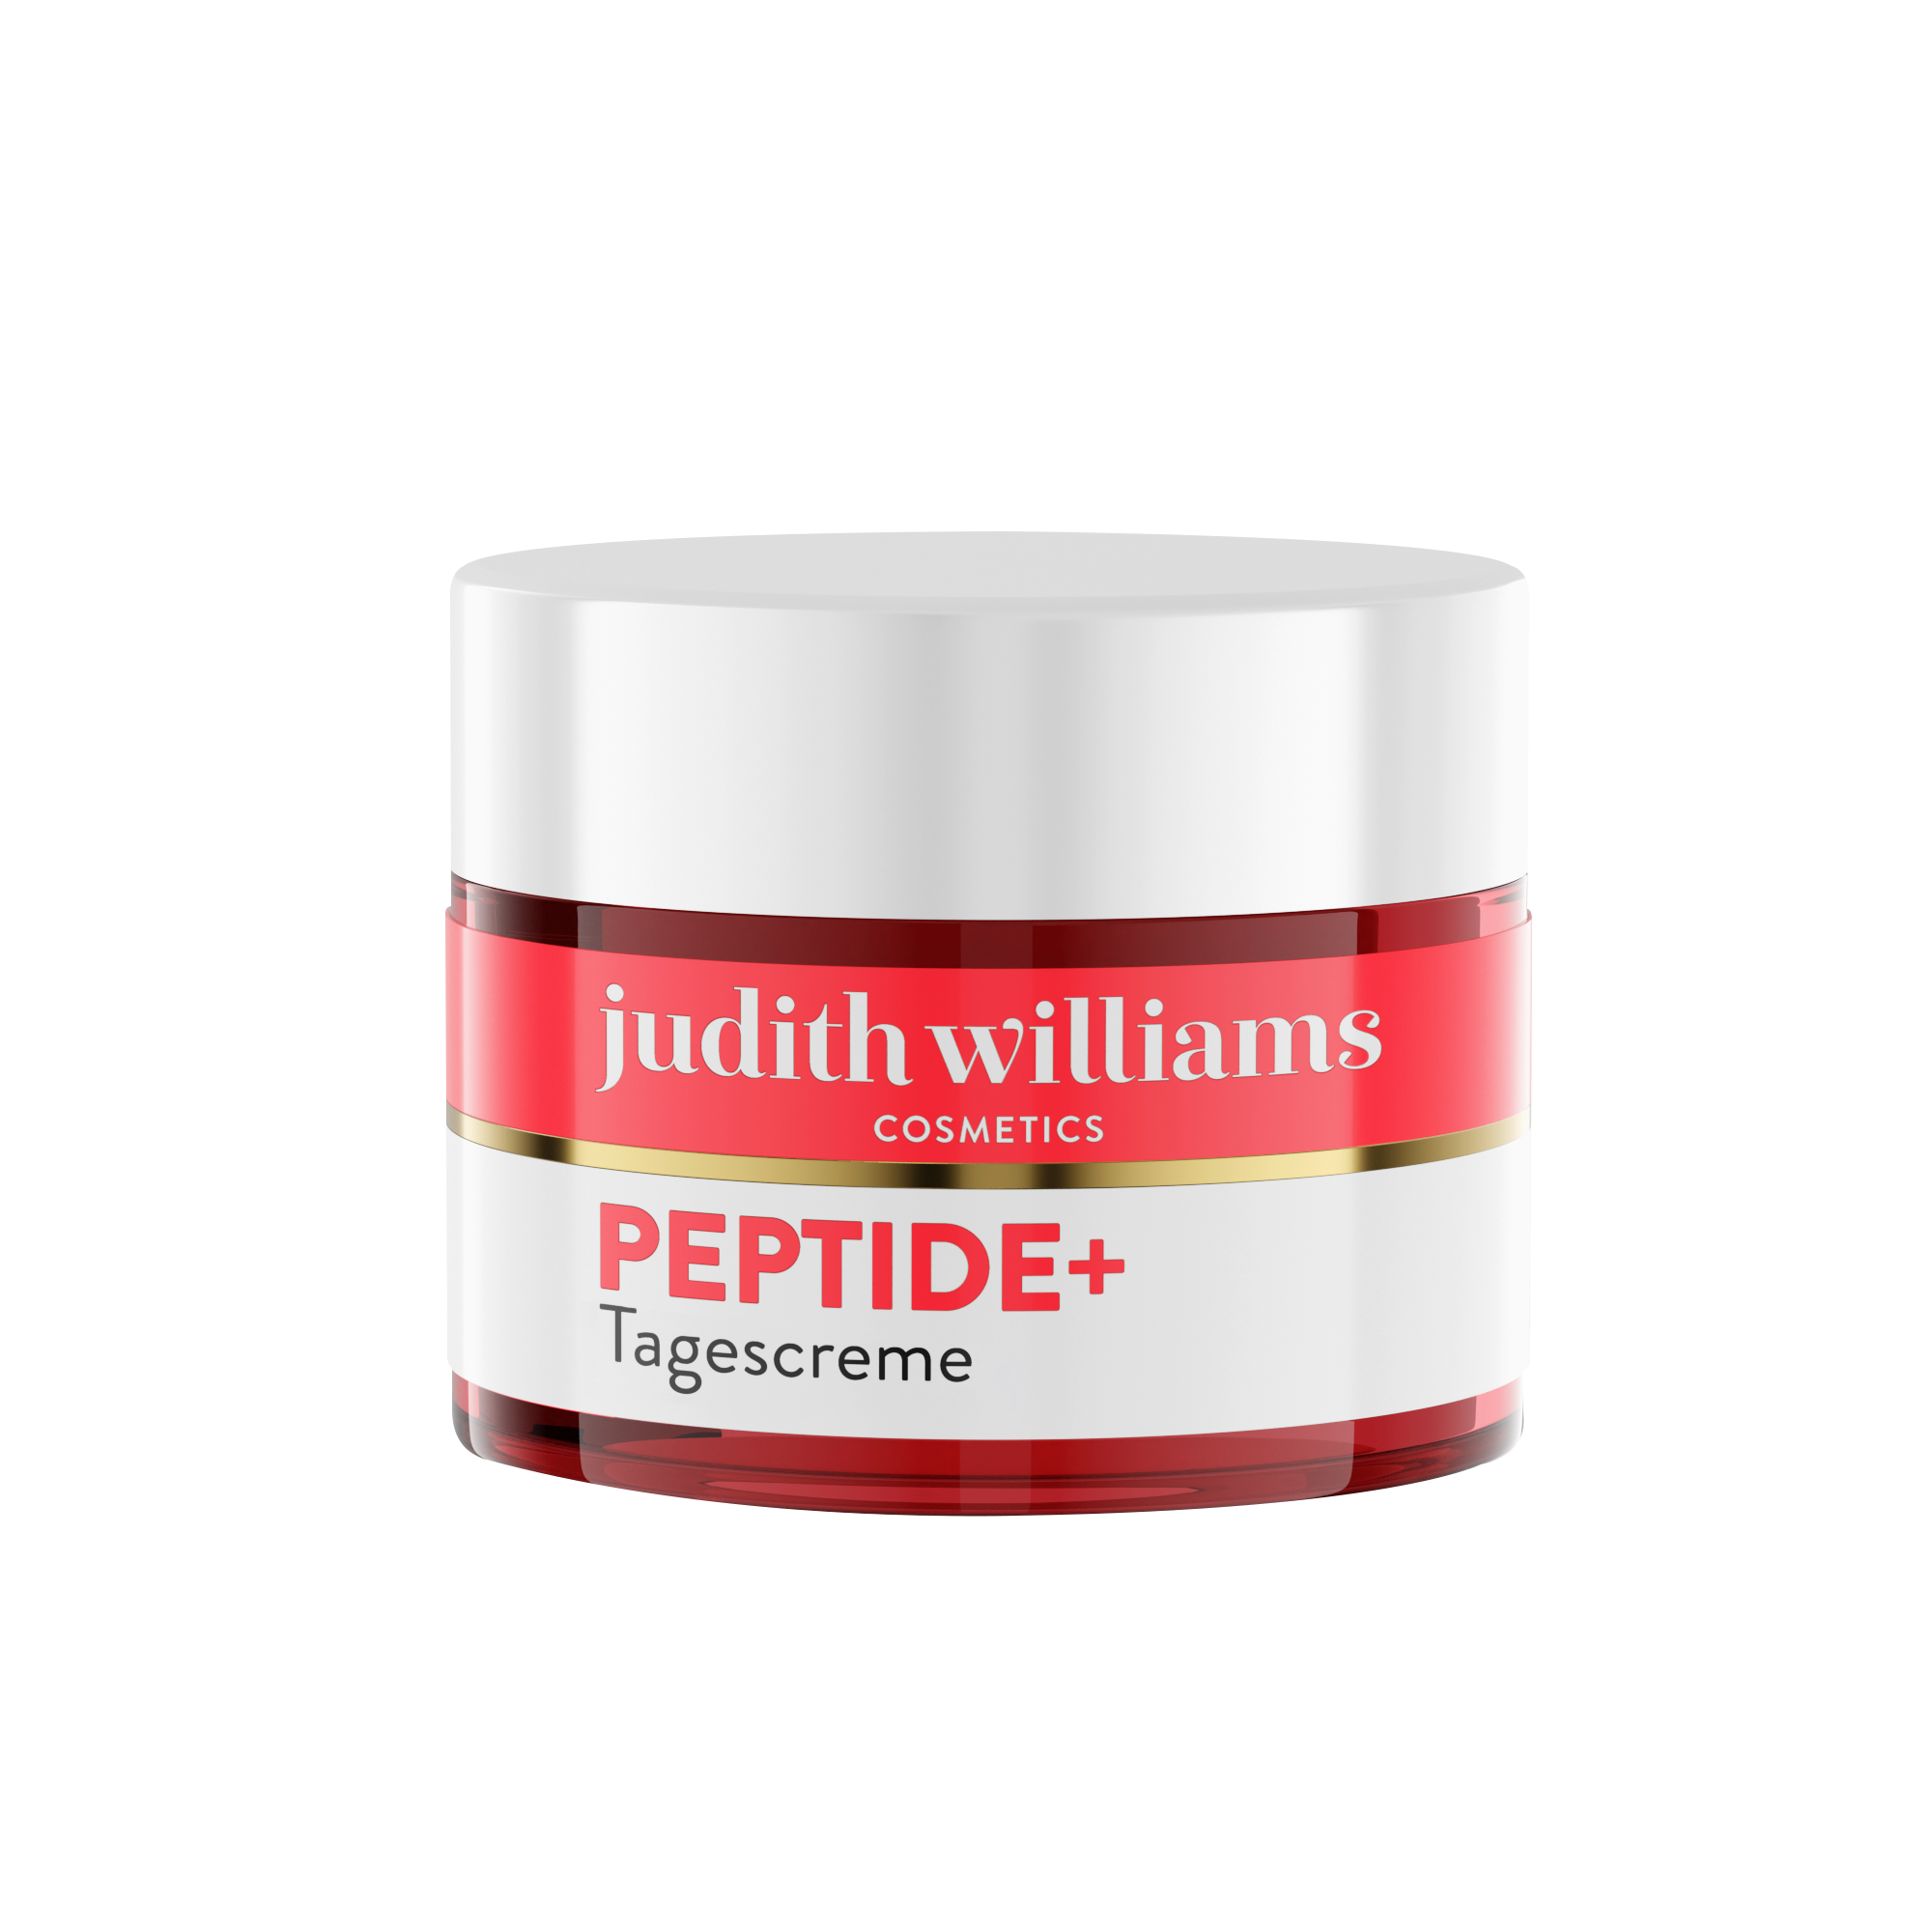 Tagescreme | Peptide+ | Tagescreme | Judith Williams